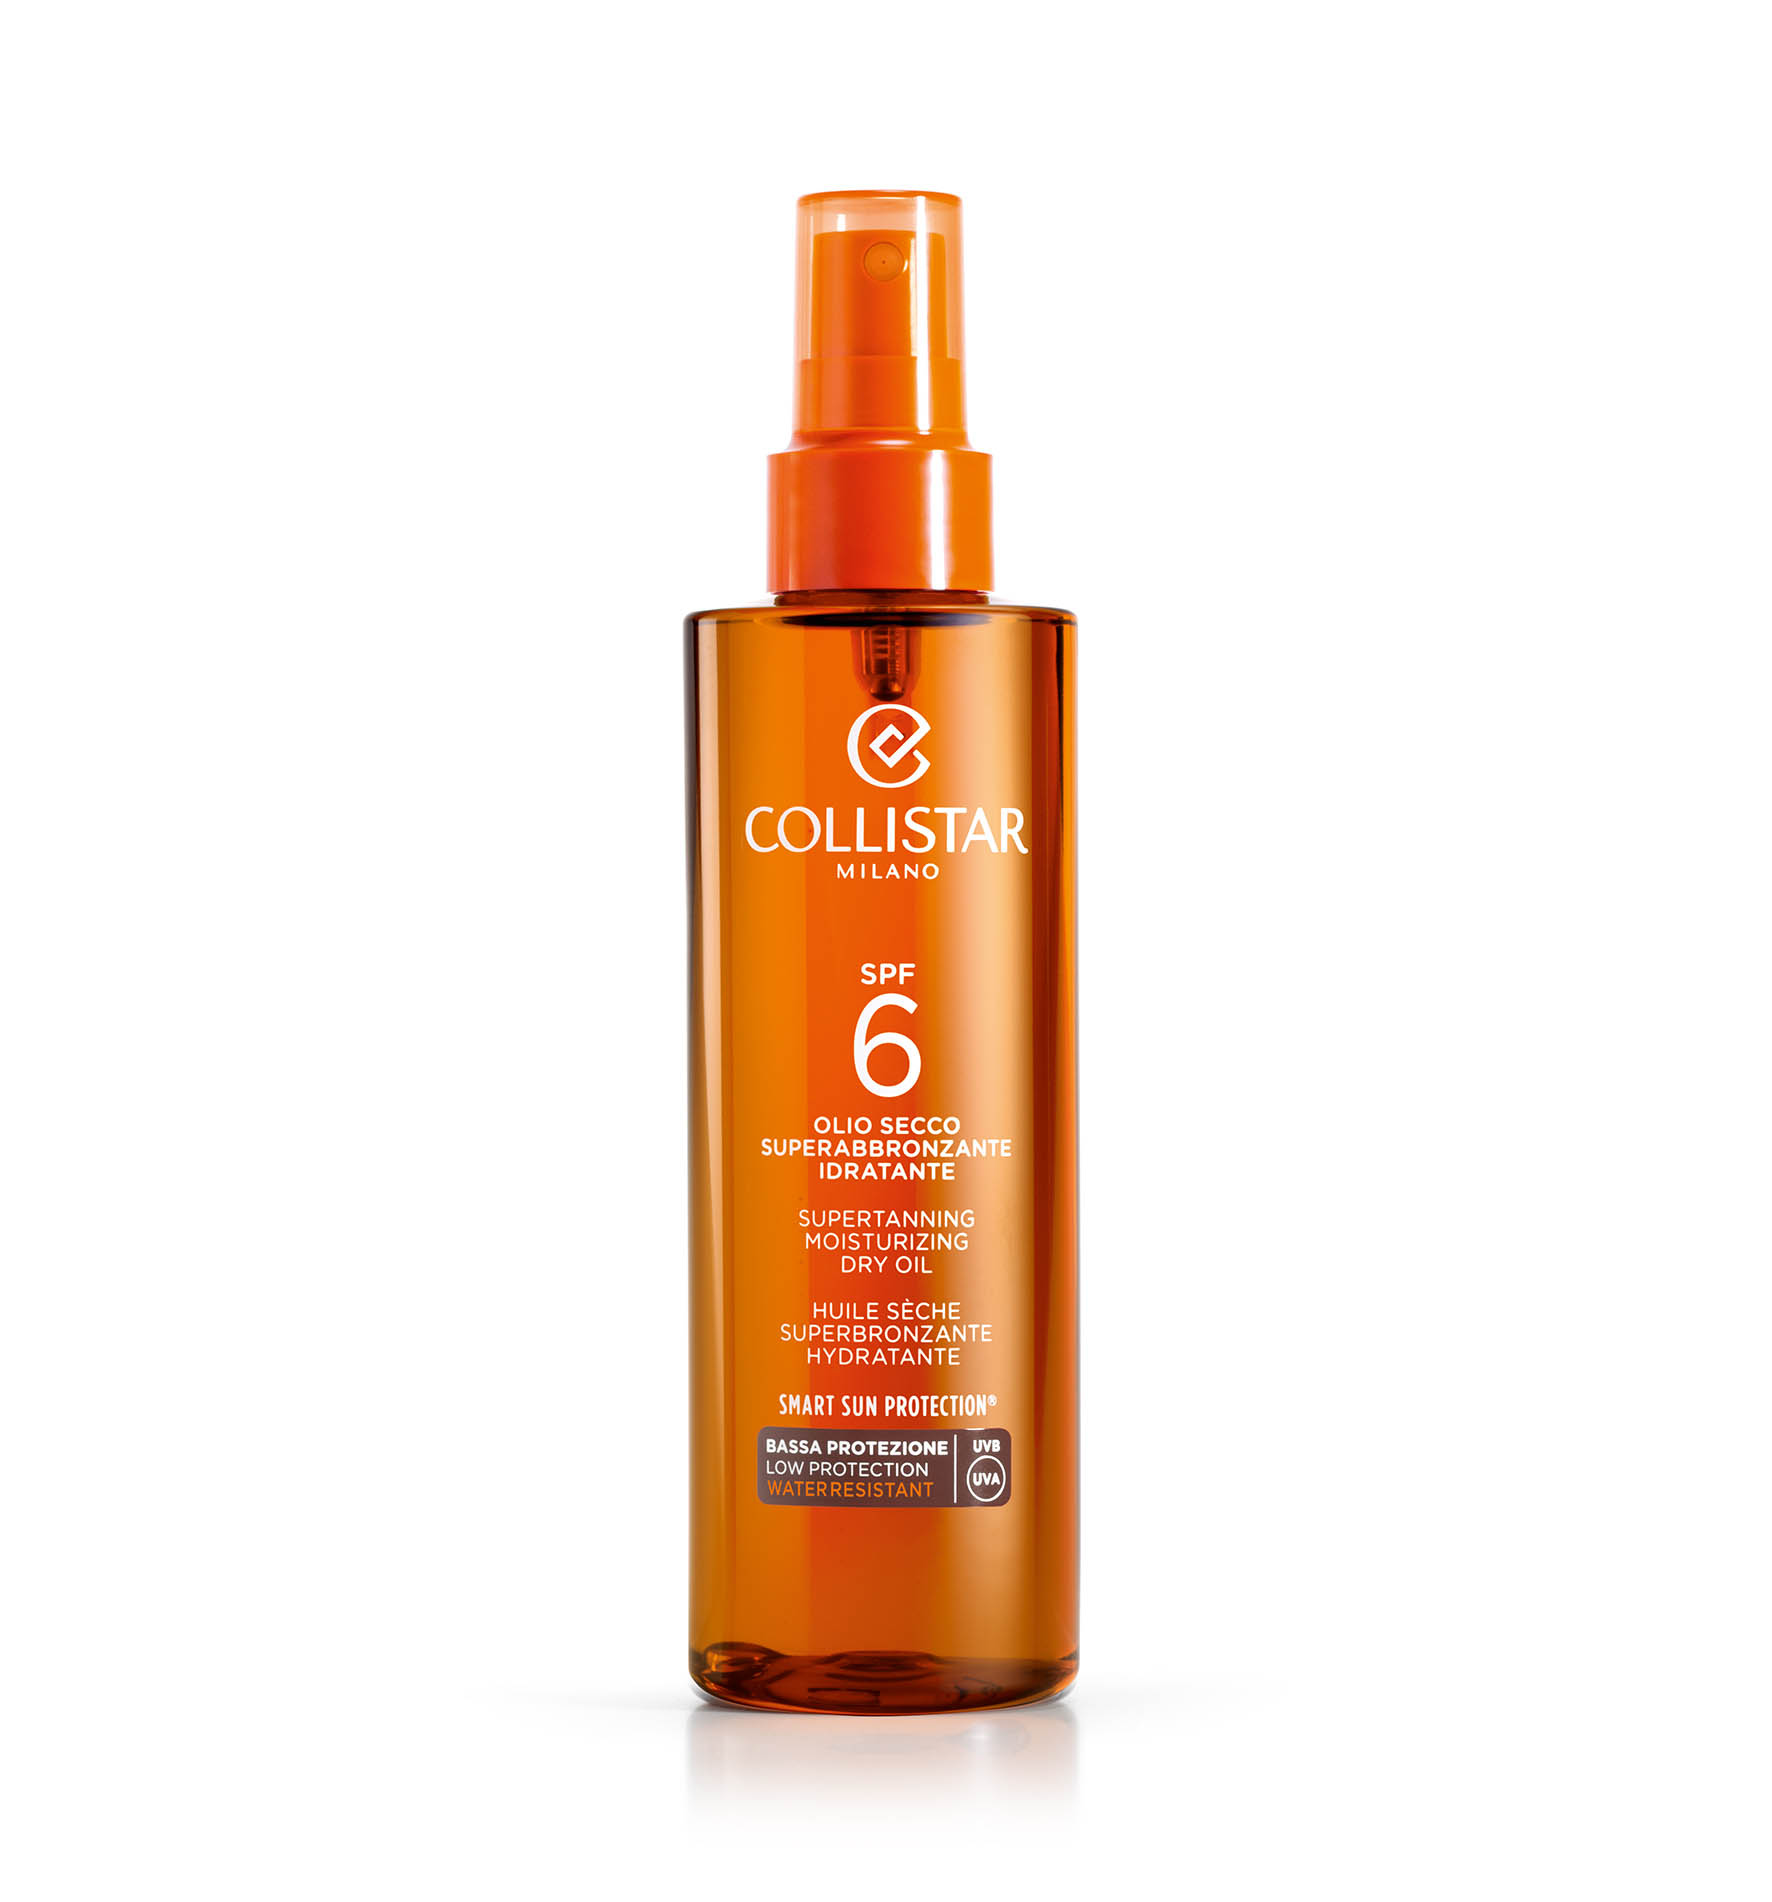 SUPERTANNING DRY OIL SPF 6 - Low Protection SPF 6-10 | Collistar - Shop Online Ufficiale